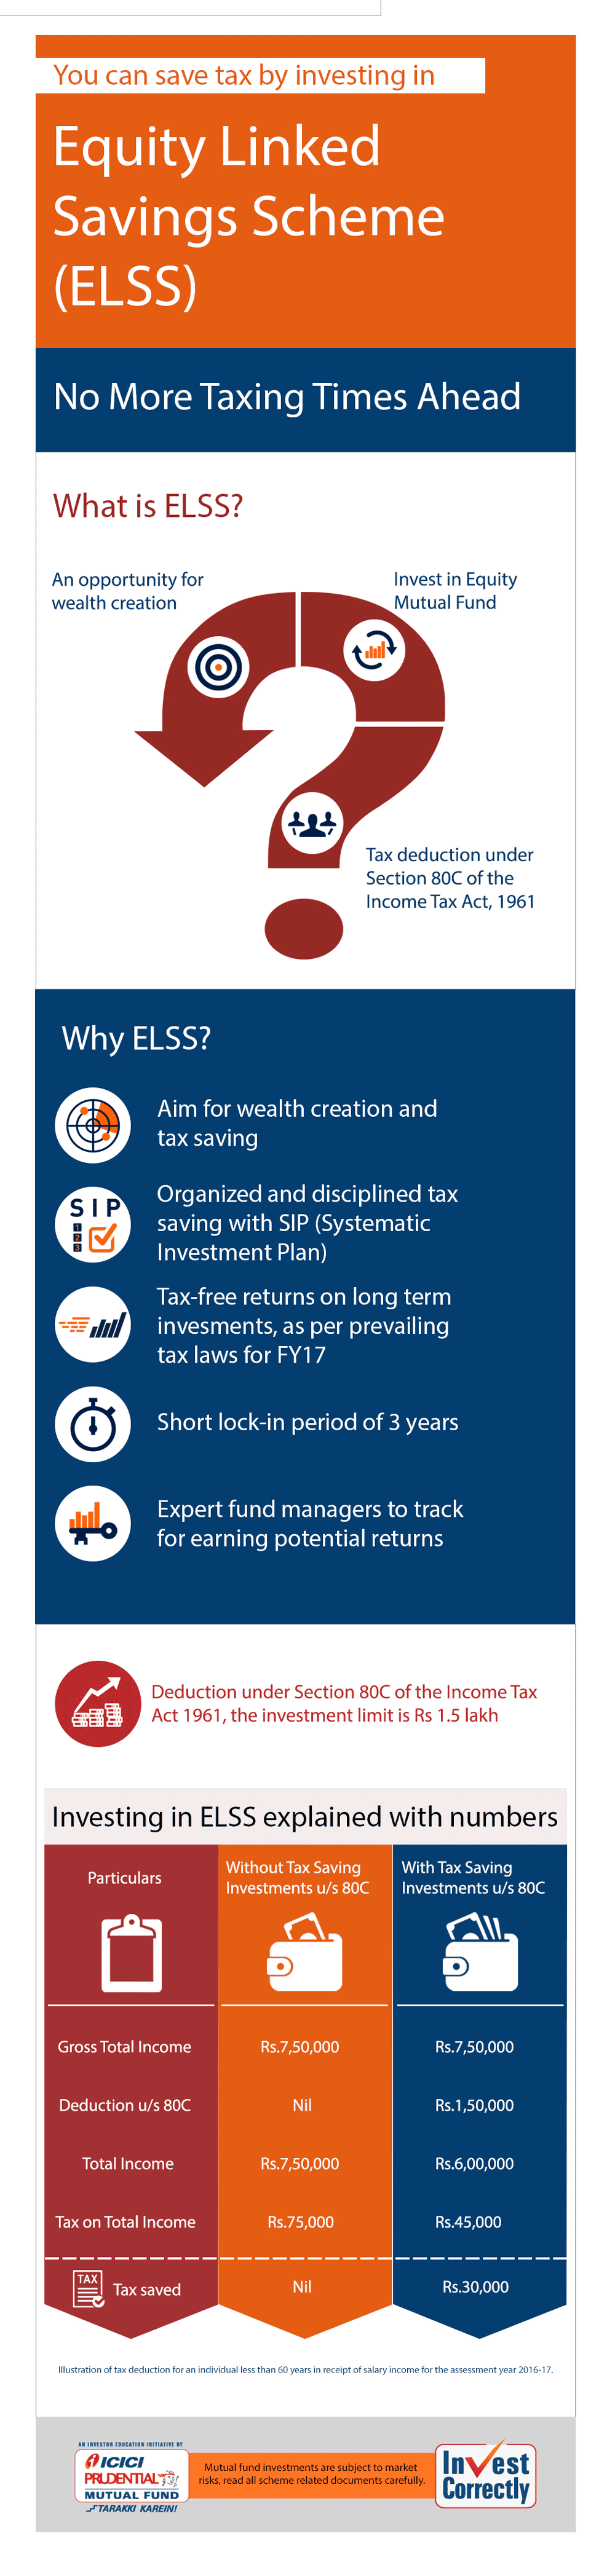 What Is An ELSS?